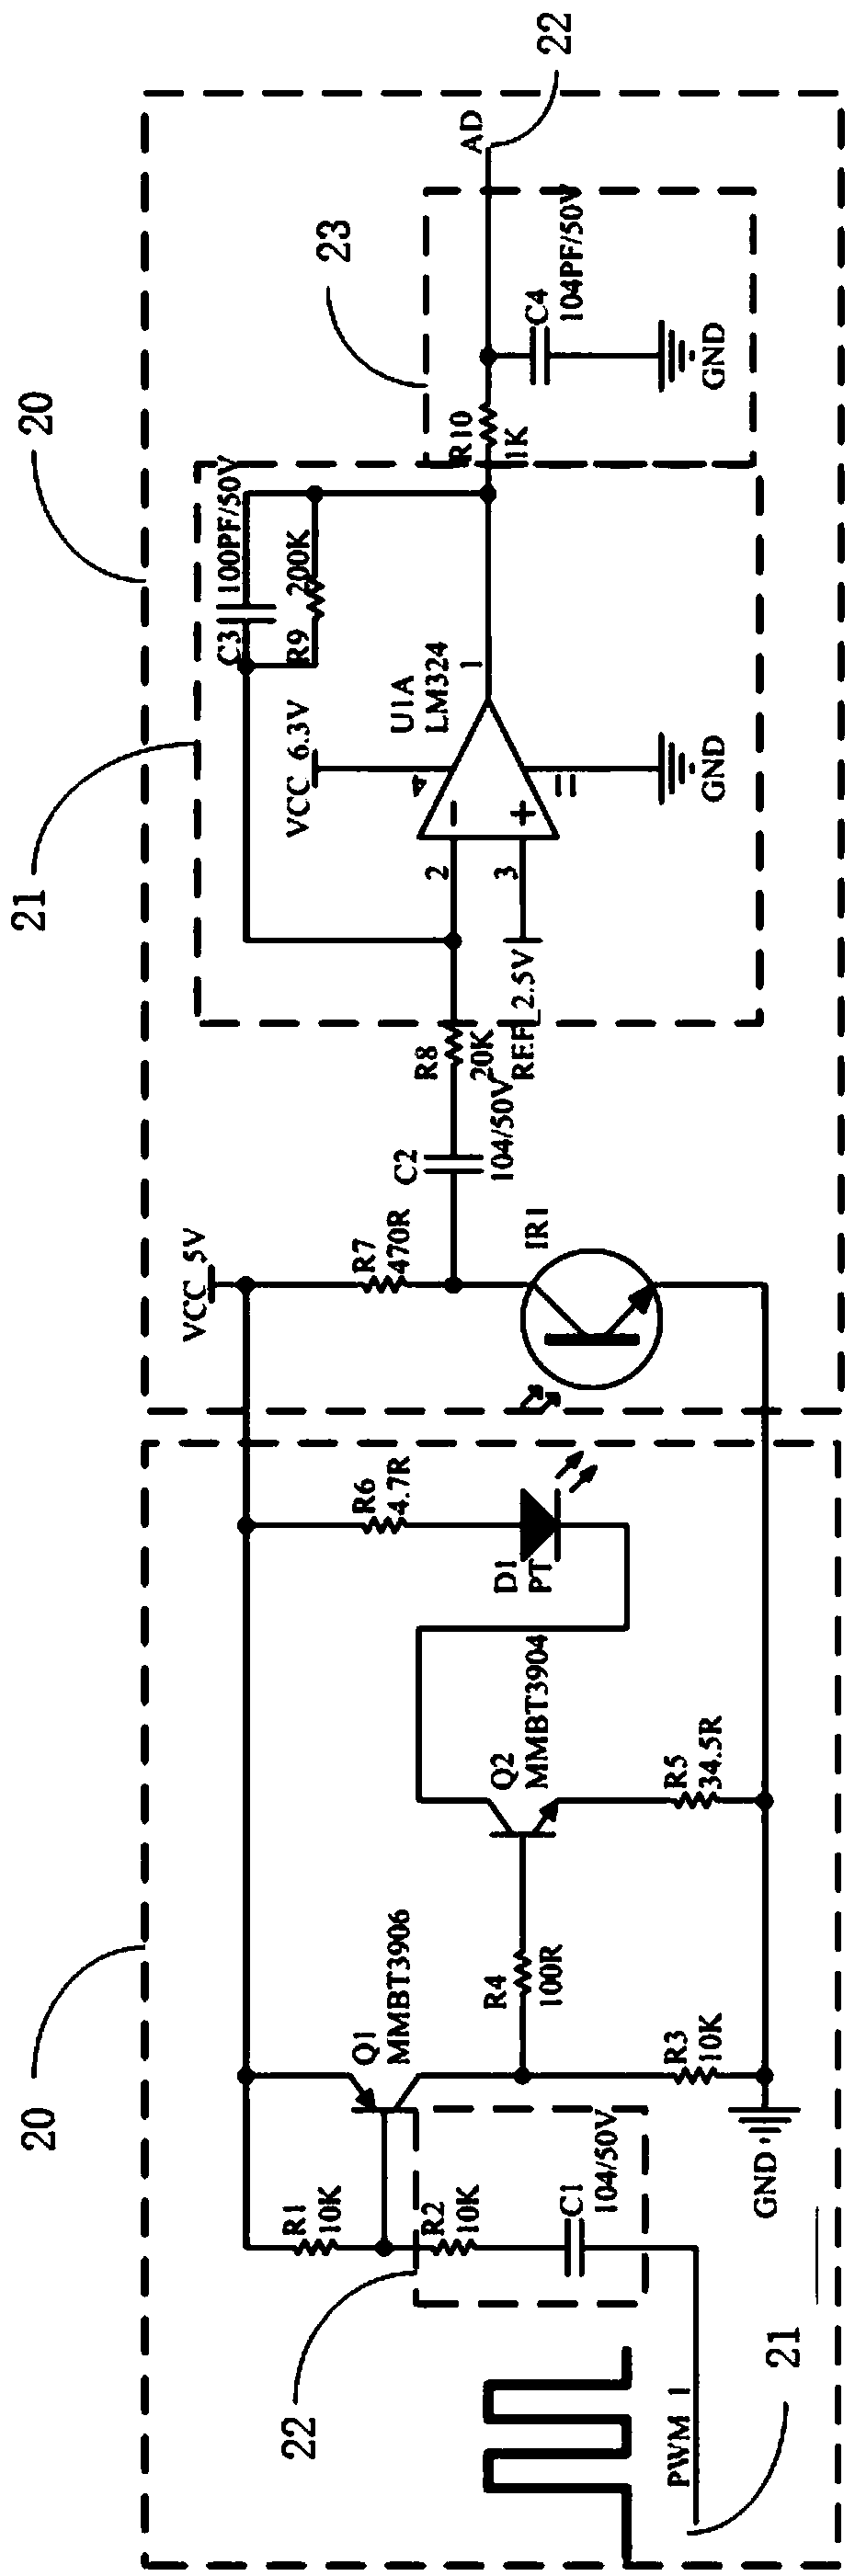 Ground detection emission control circuit and sweeping robot